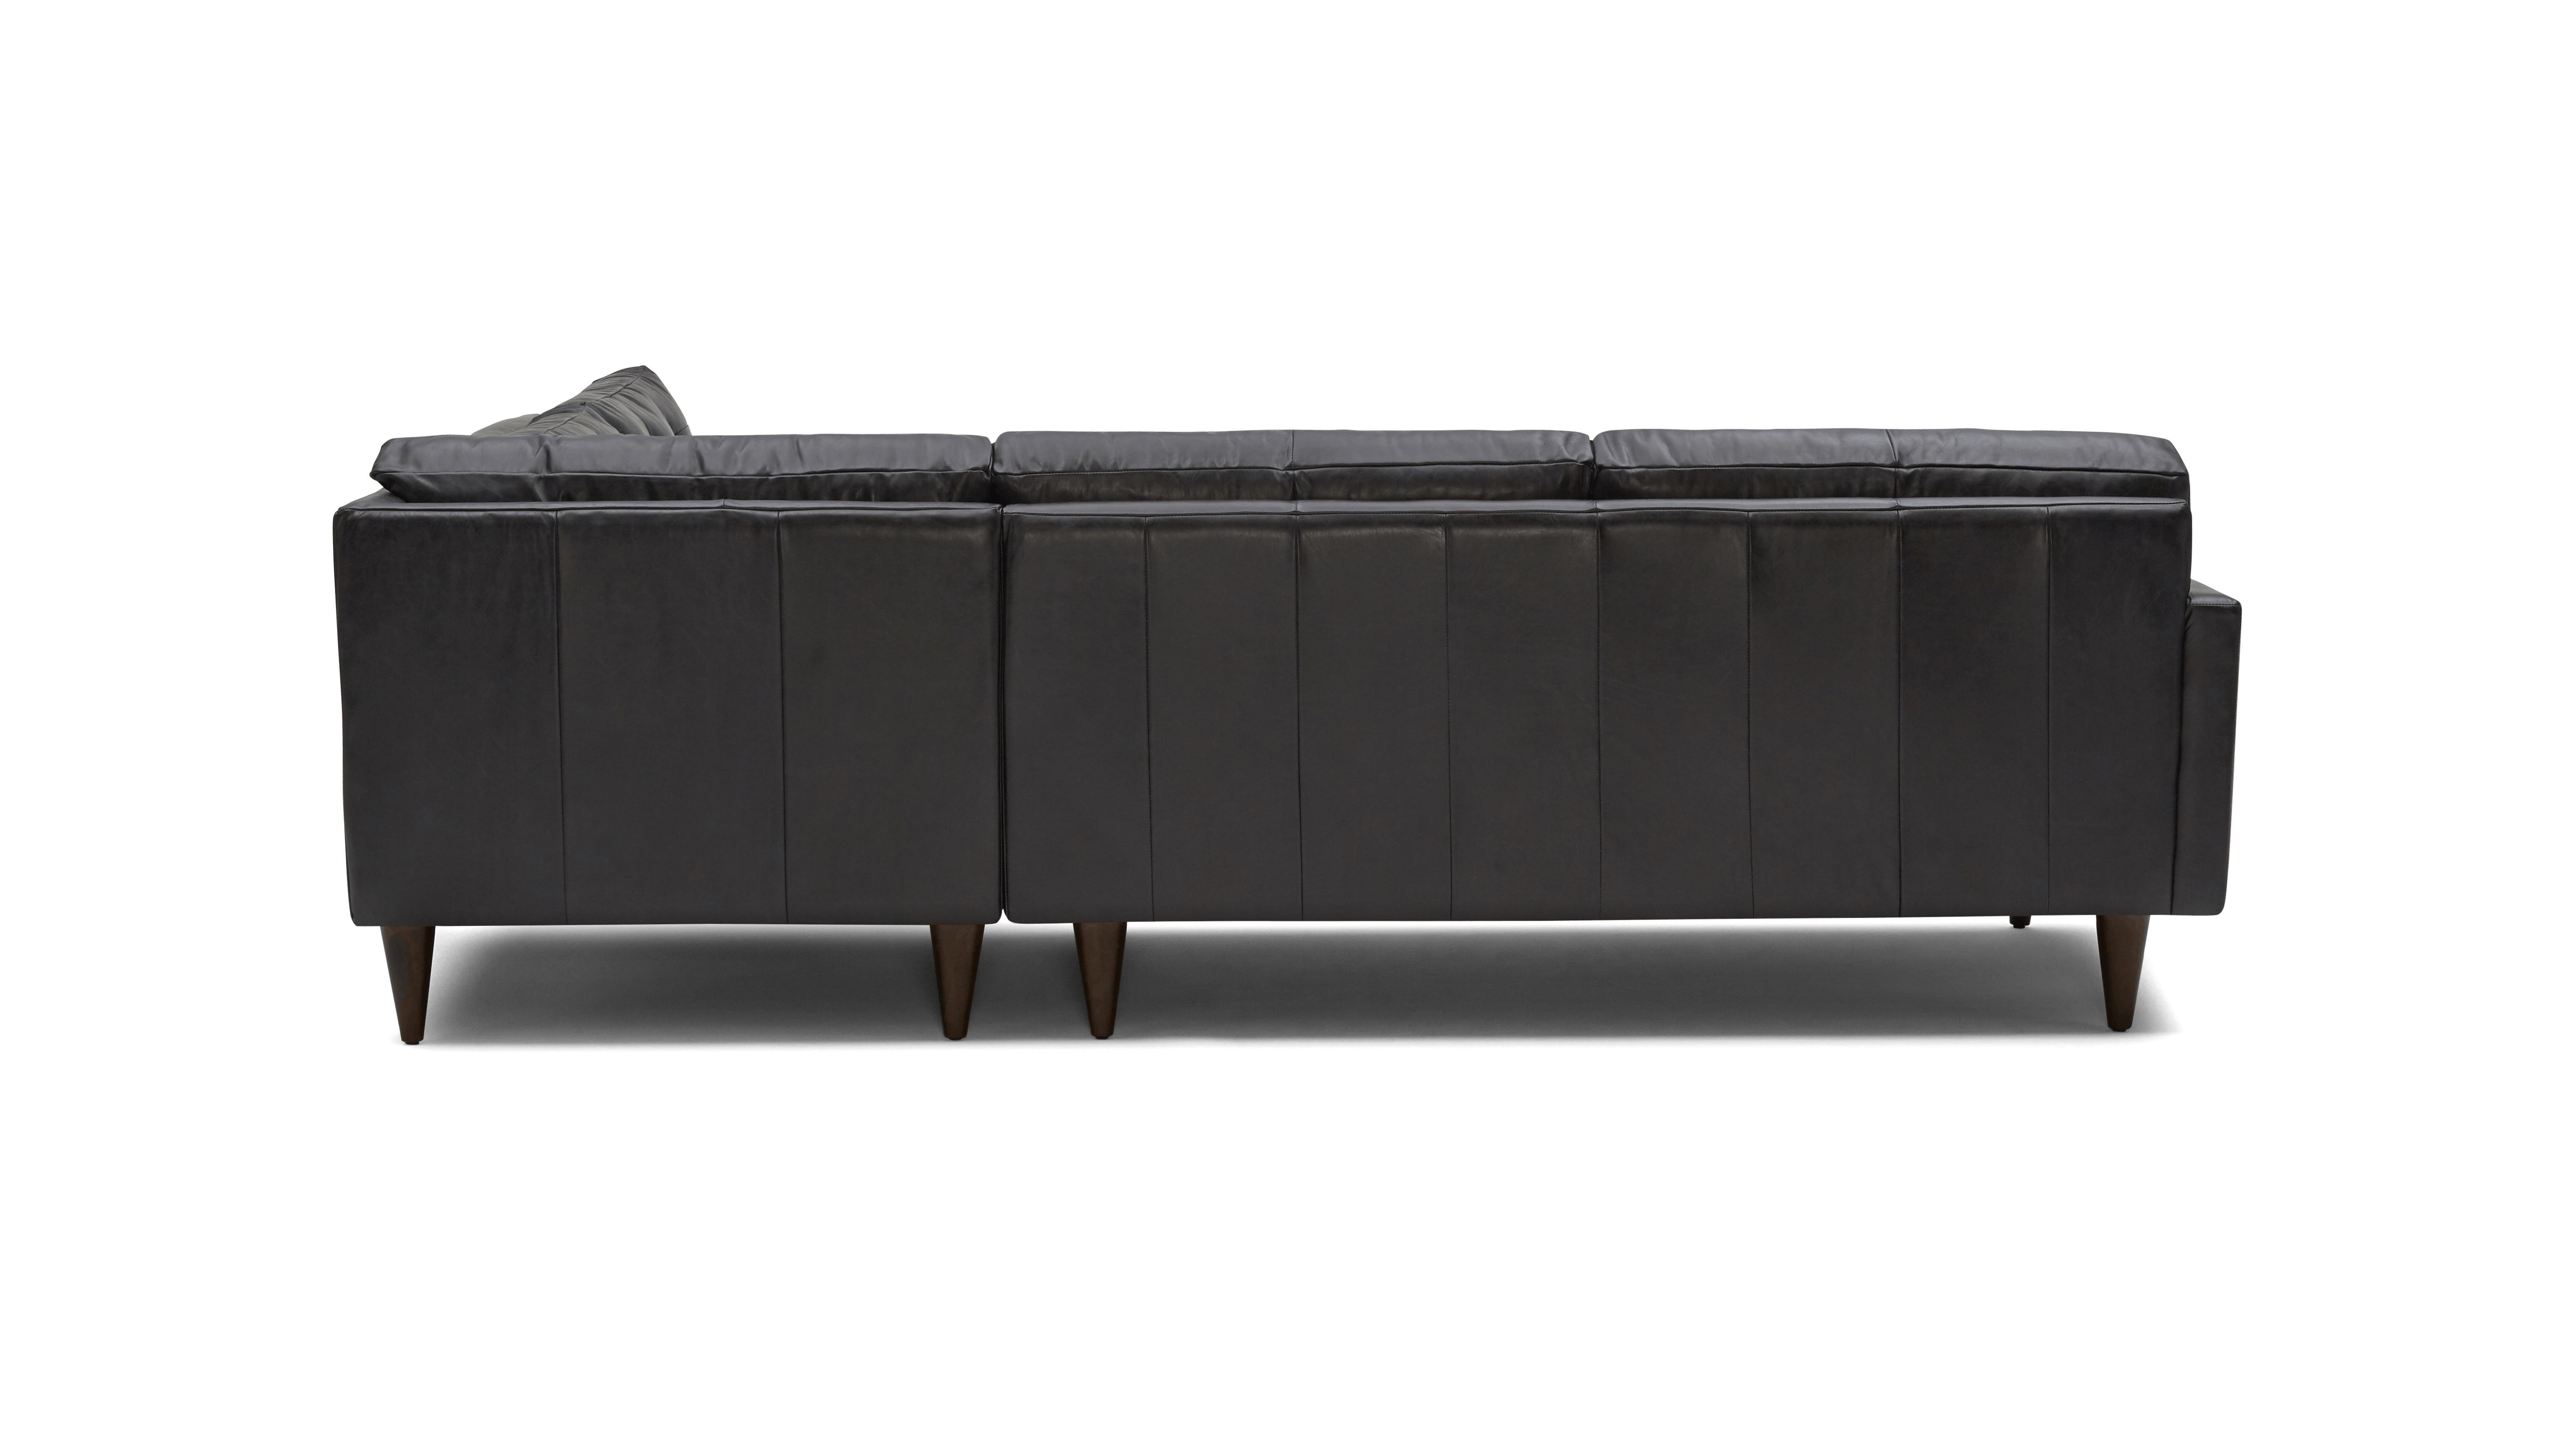 Black Eliot Mid Century Modern Leather Sectional with Bumper - Santiago Steel - Mocha - Right  - Image 4